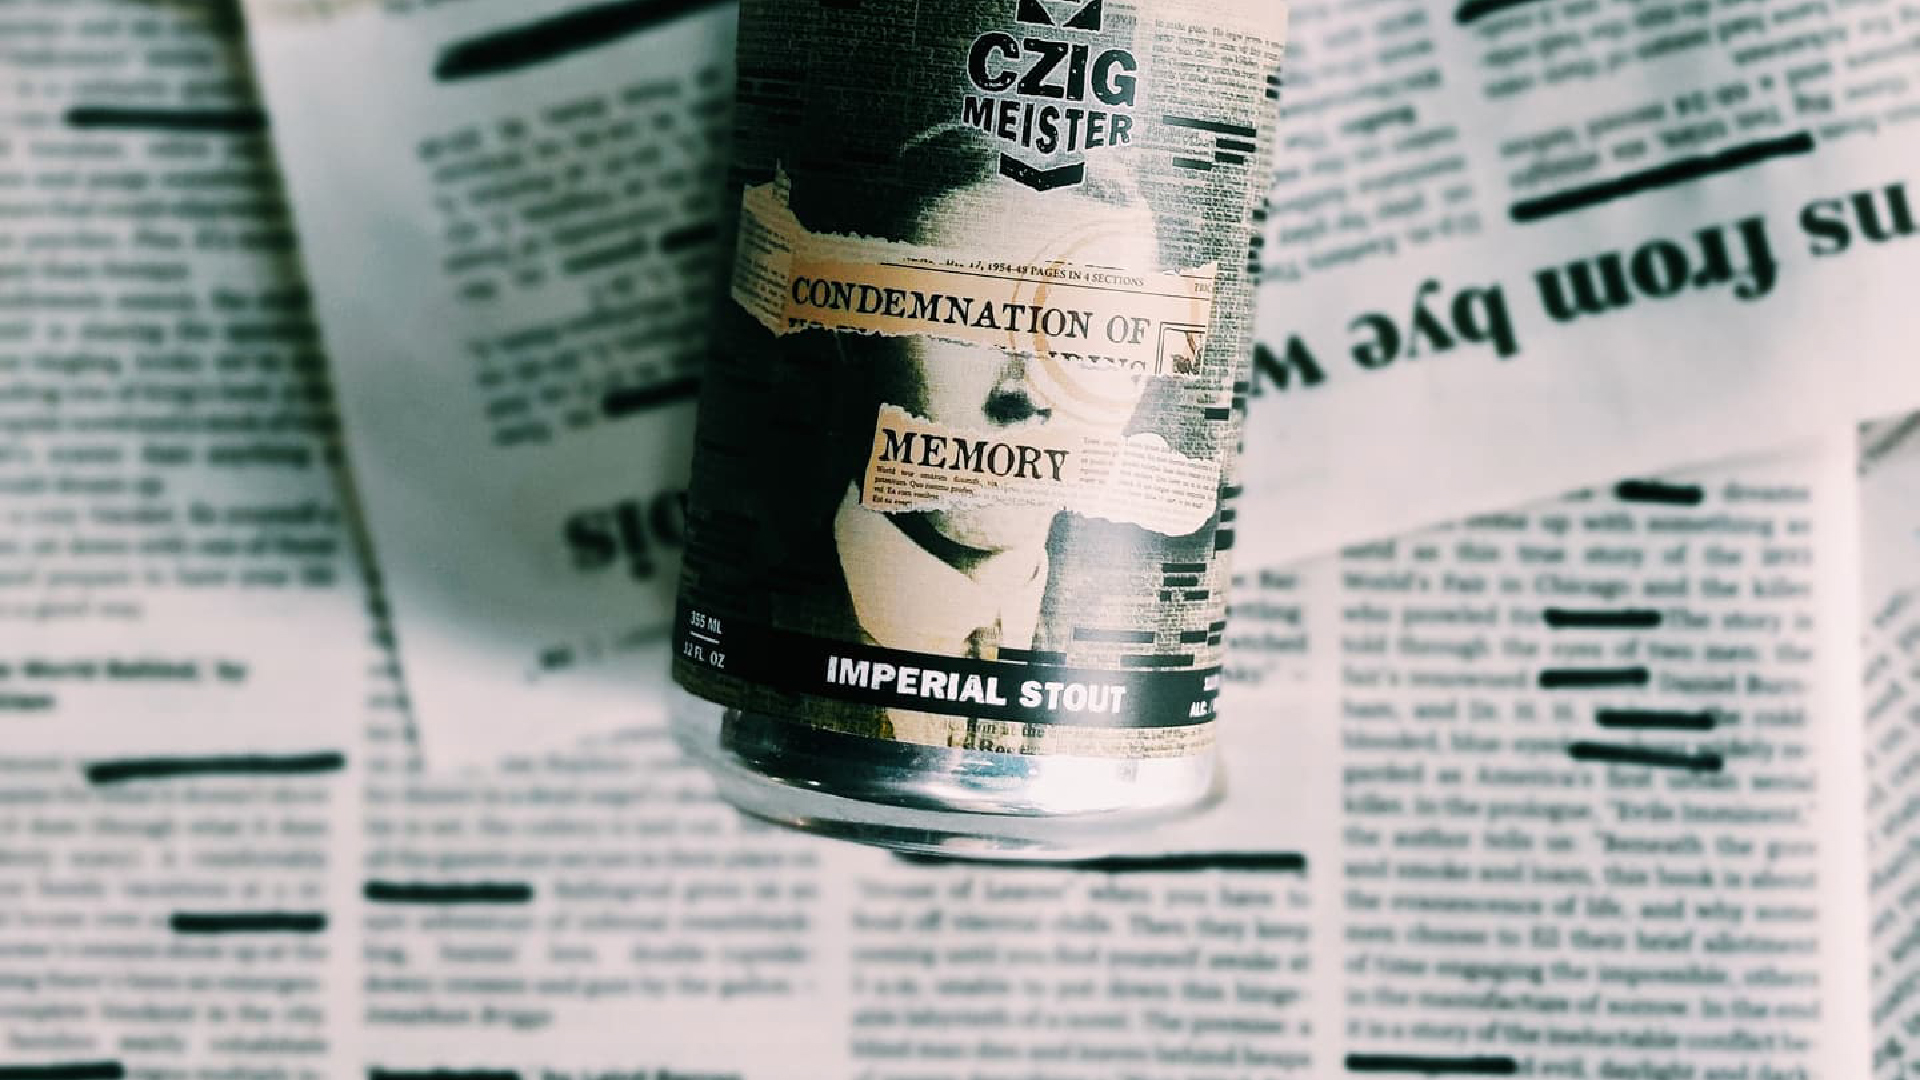 Condemnation of Memory Imperial Stout from Czig Meister Brewing Company releasing November 3rd